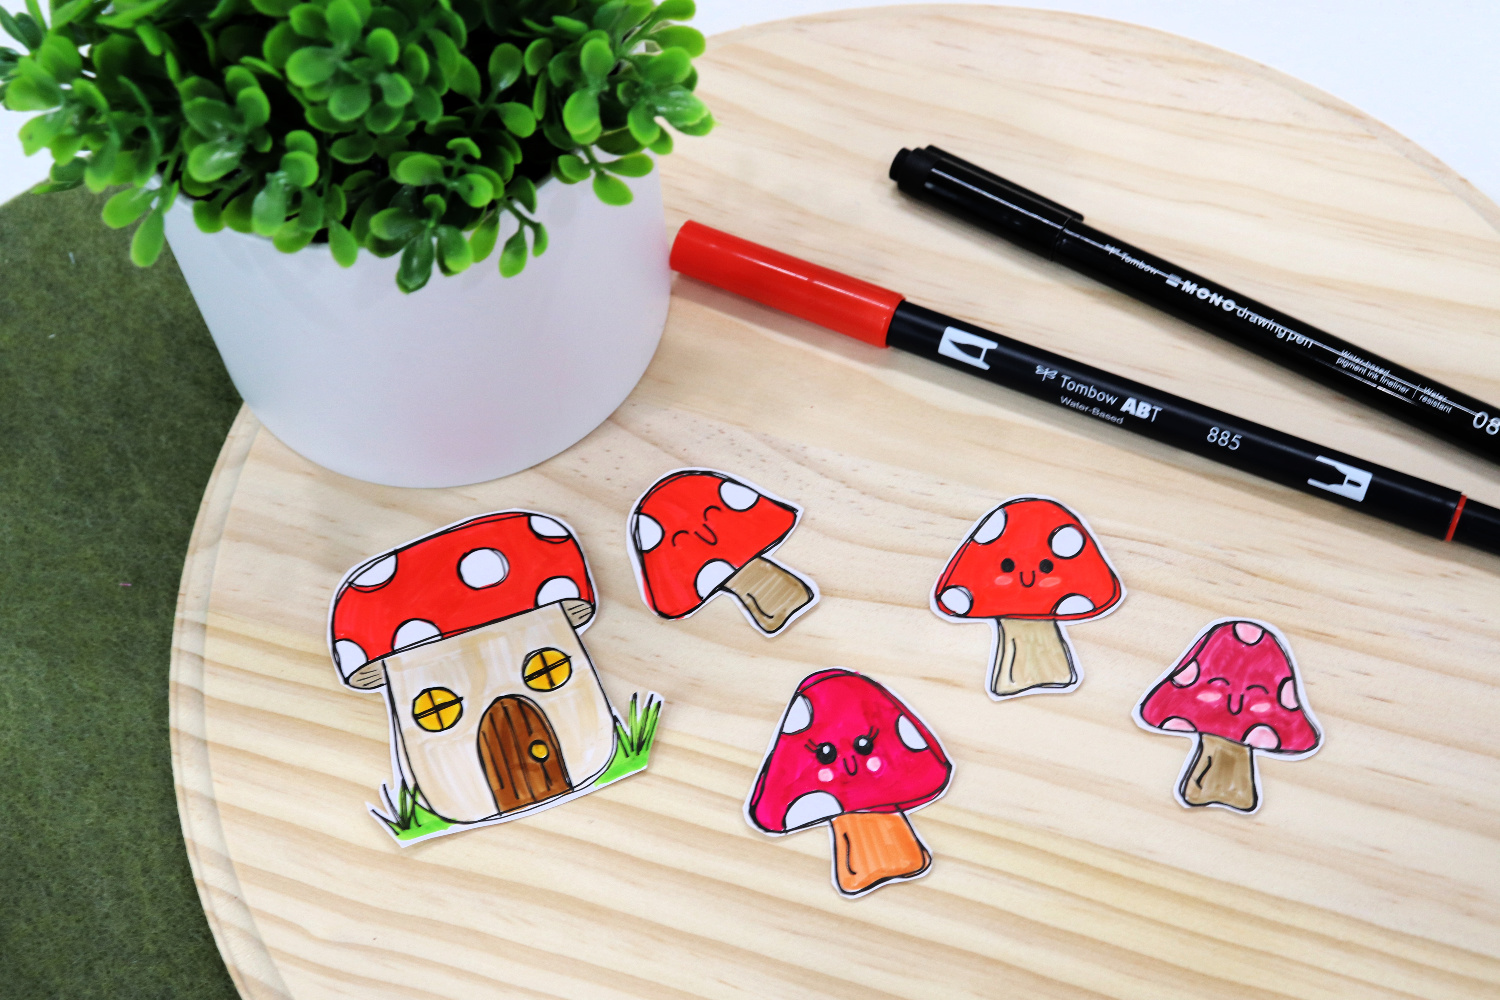 Image contains hand-doodled stickers; four toadstools and a toadstool house, sitting on a wooden circle. A red and a black marker sit nearby, along with a faux plant.